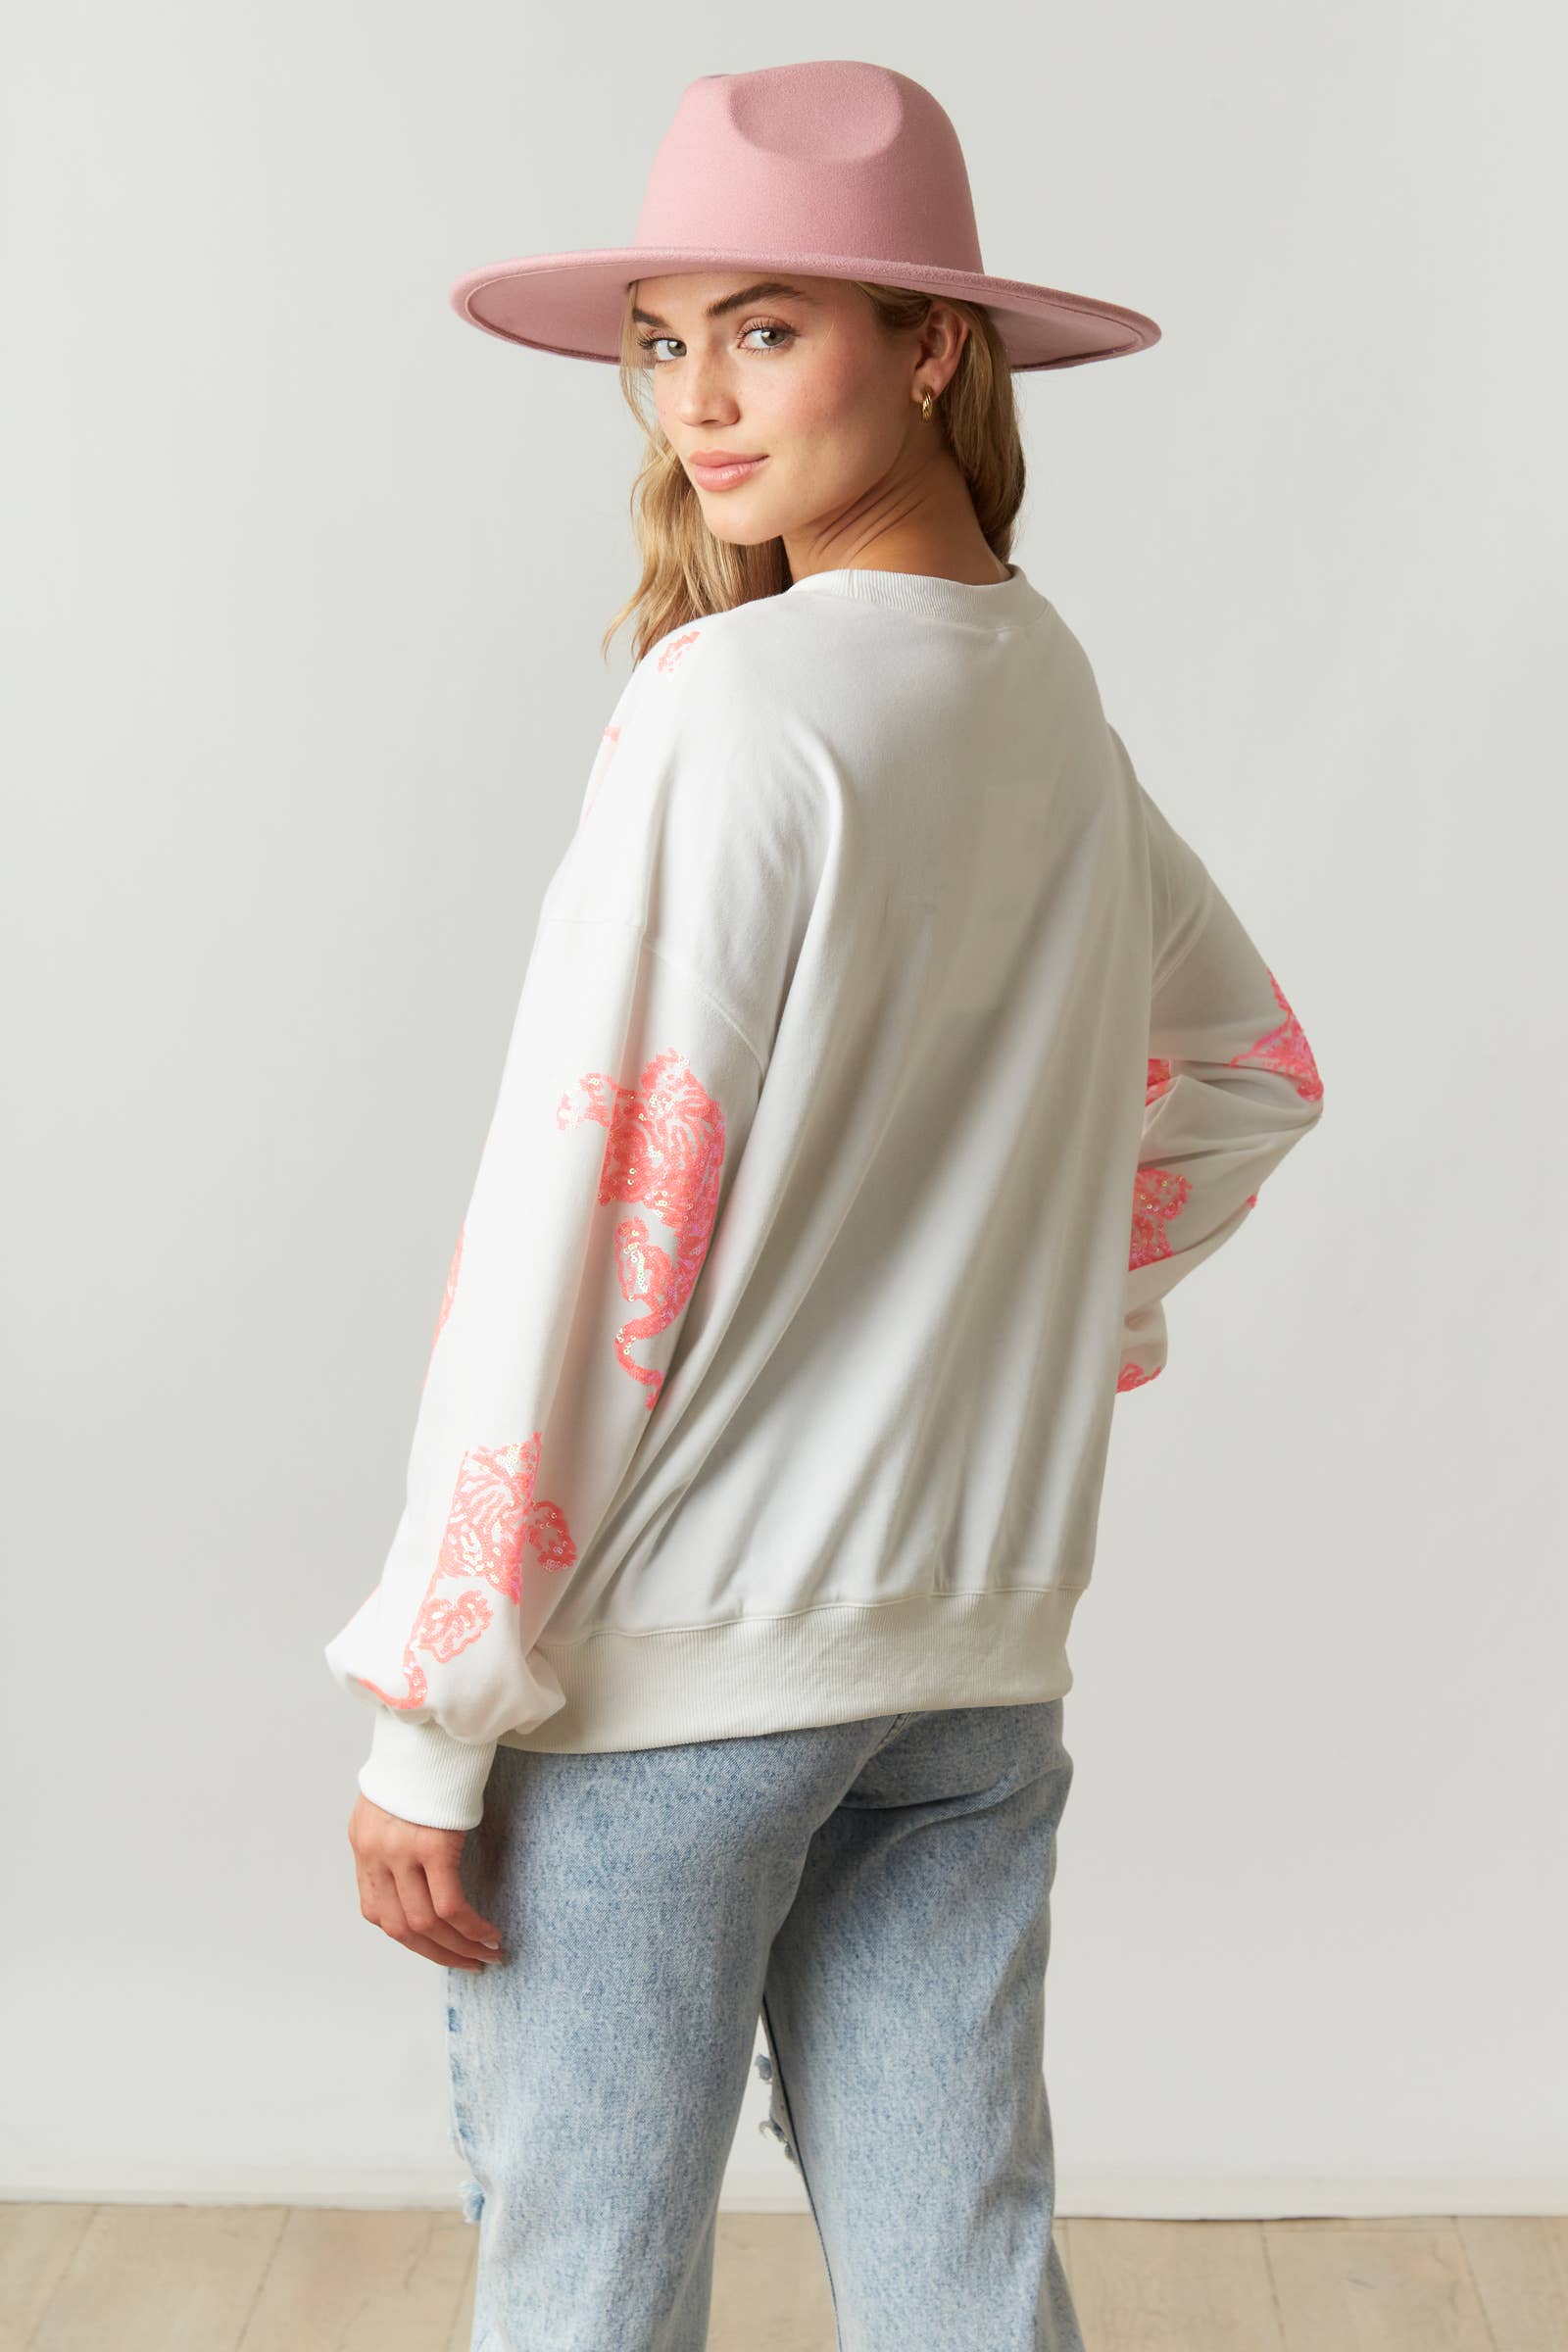 Crew Neck Pull Over with Sequin Tigers - IFKT54483-01: S / WHITE/PINK - Bexa Boutique